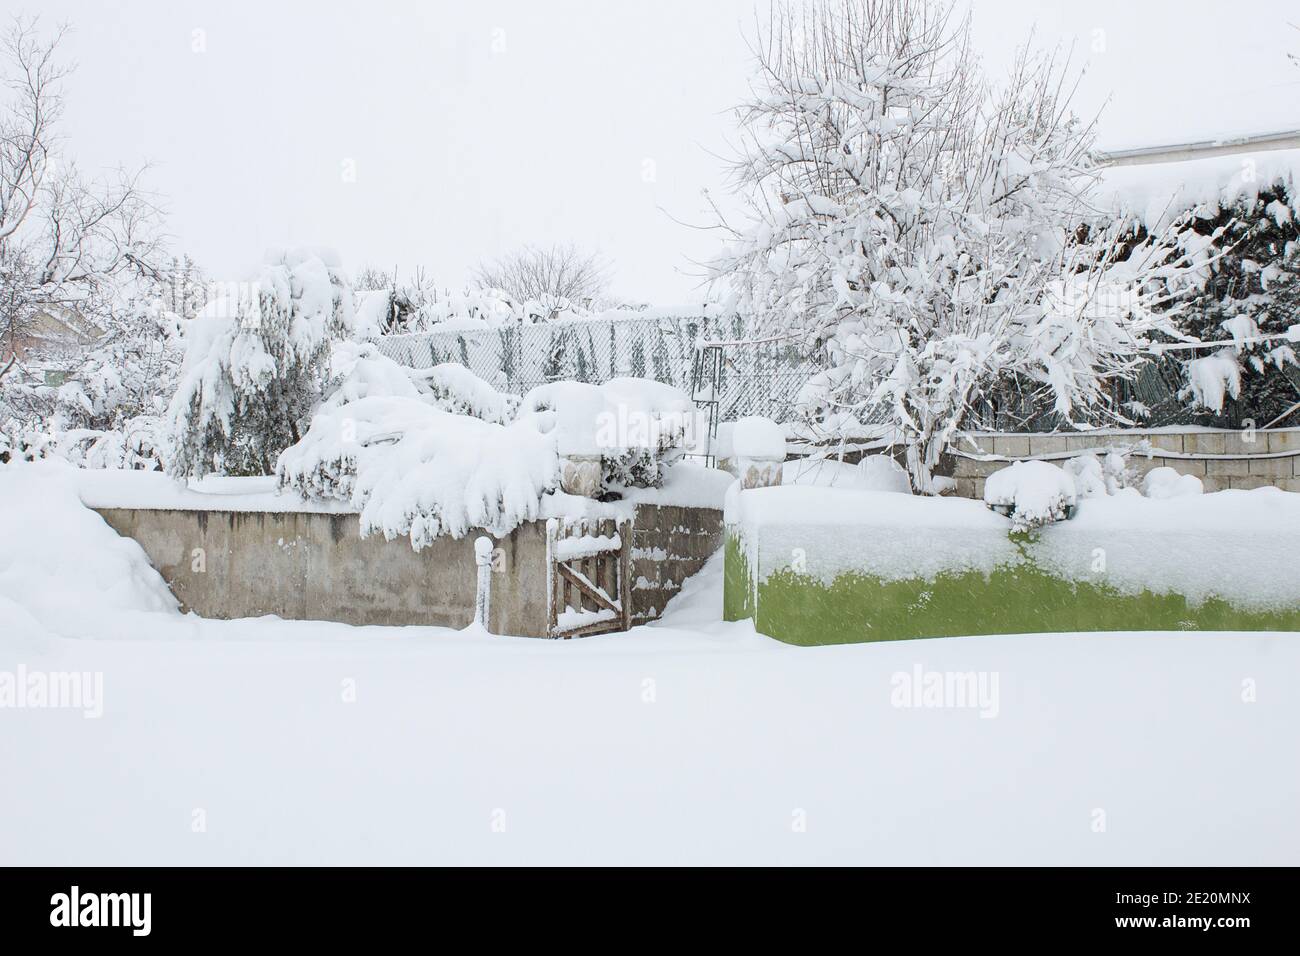 Winter landscape of a courtyard with plants and trees covered in snow. Rough weather. Stock Photo